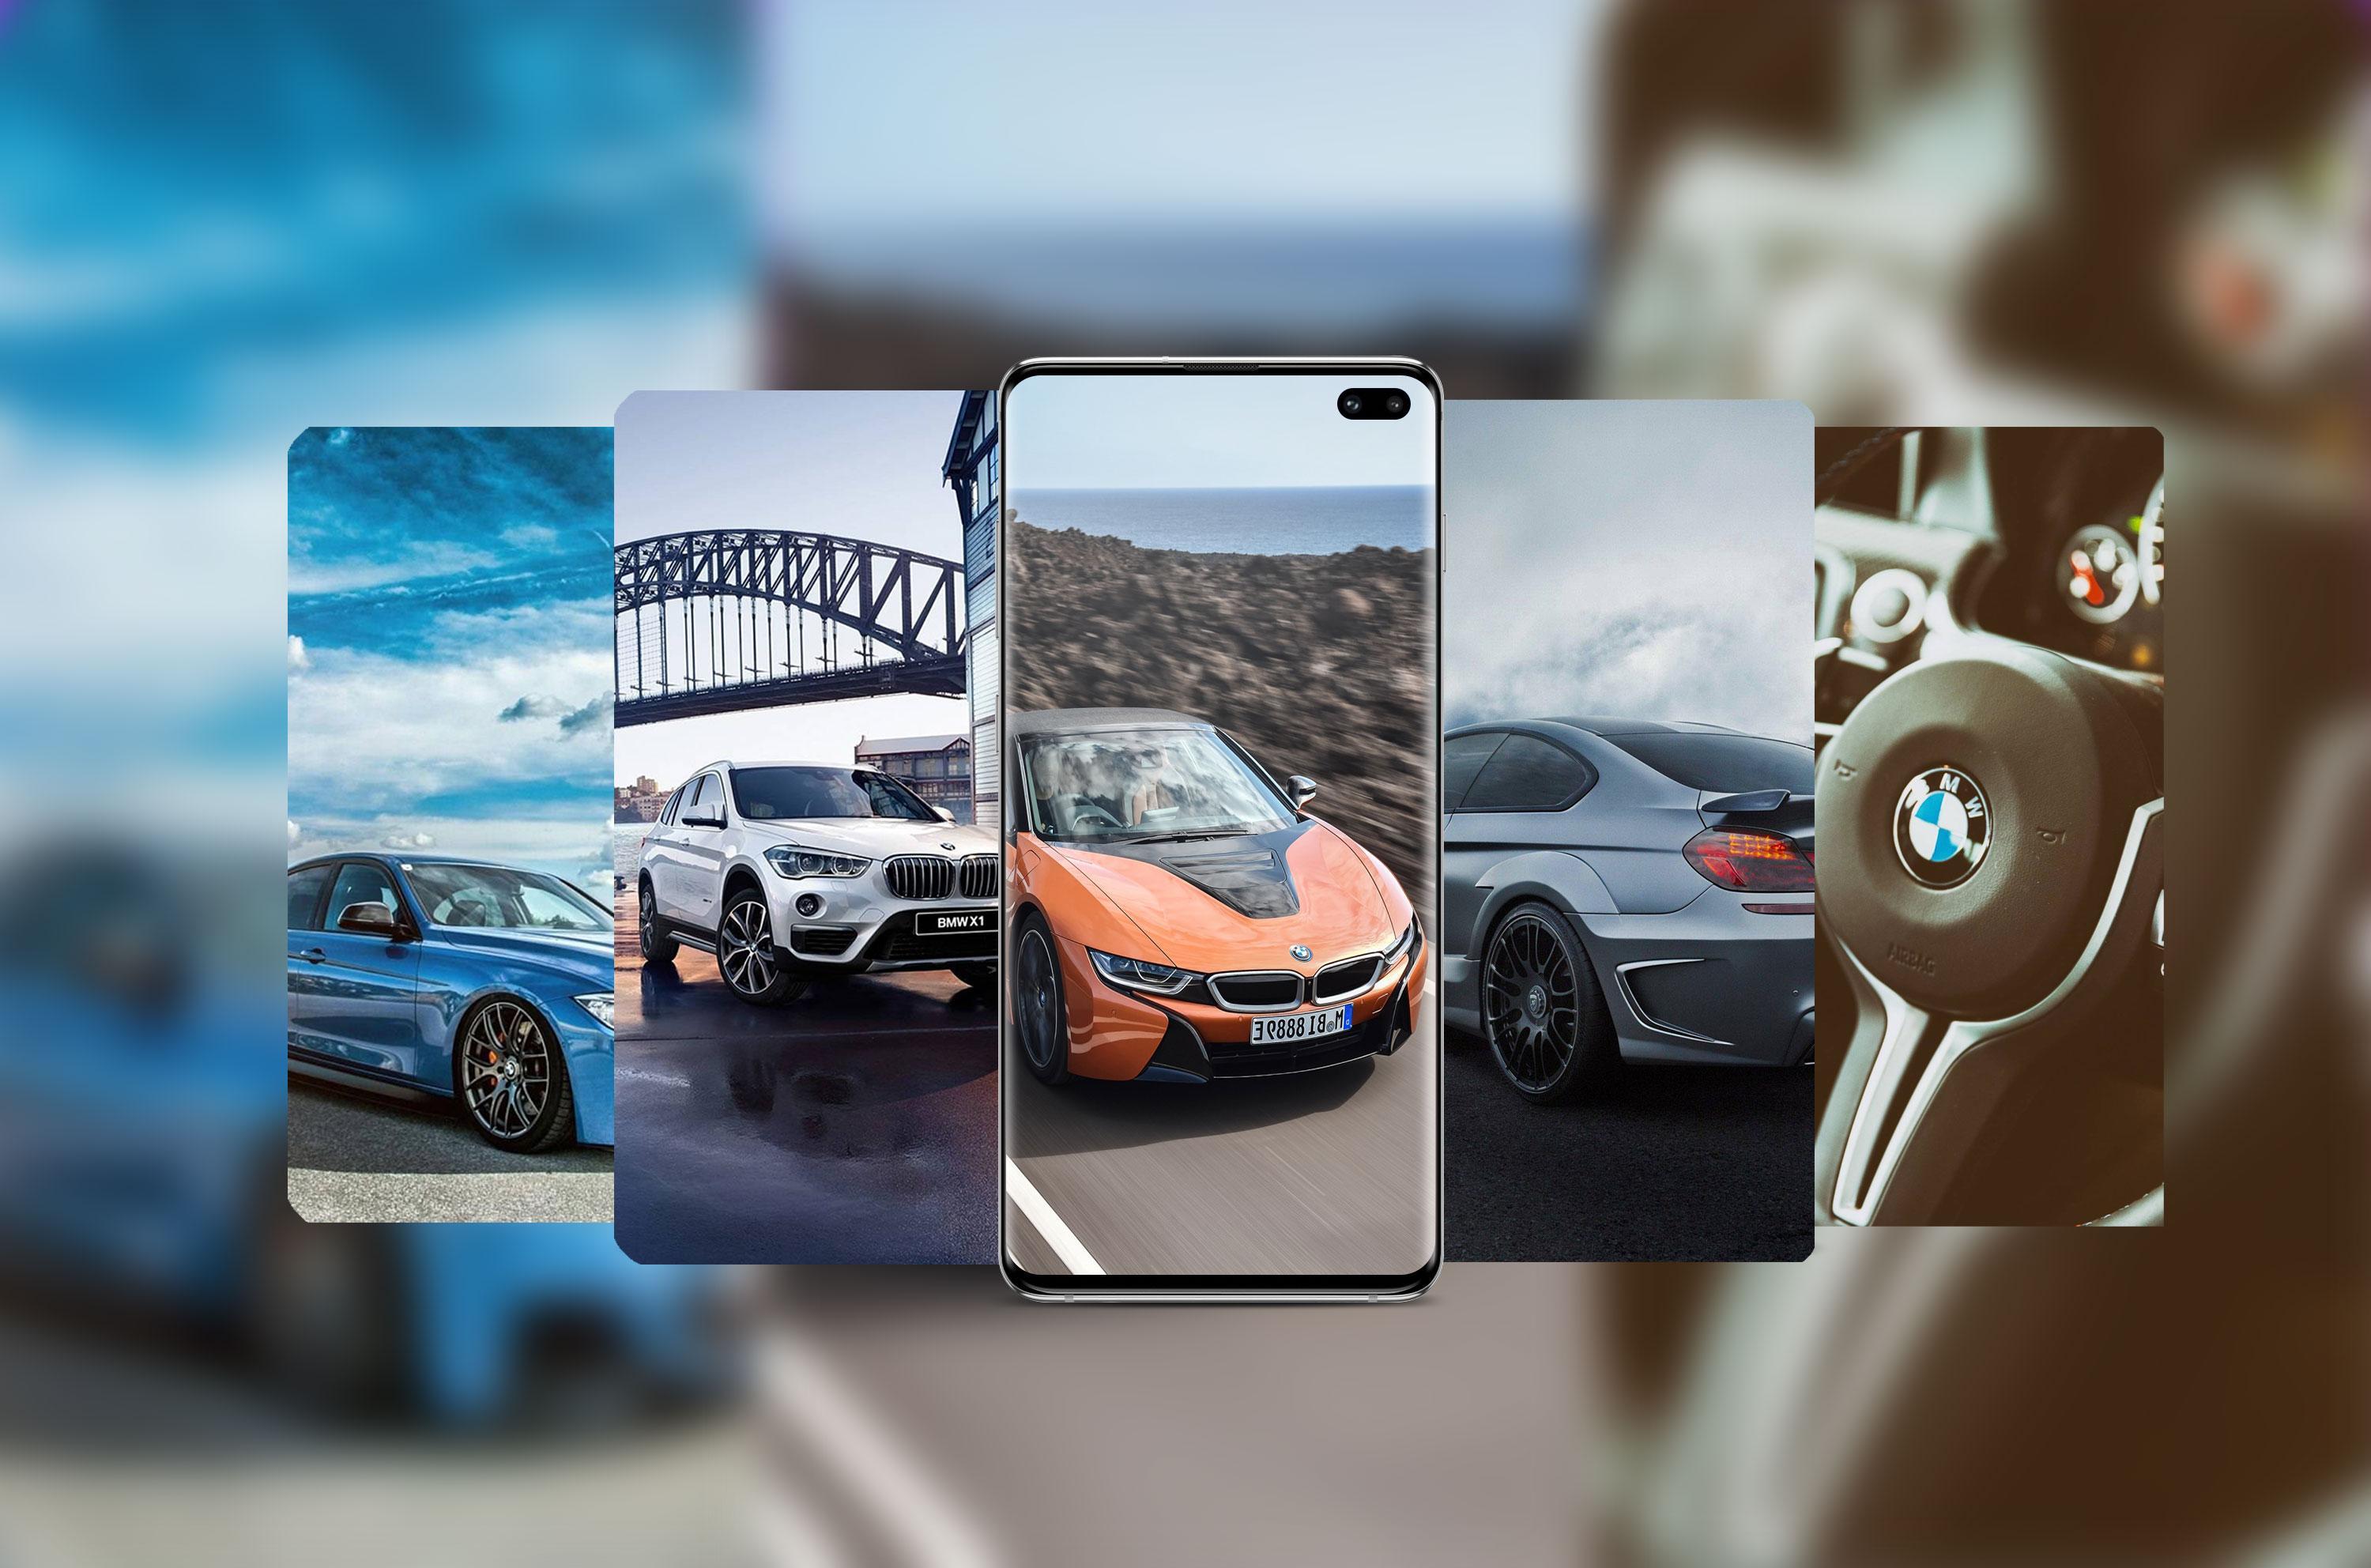 Best Bmw Live Wallpaper 2020 Hd 4k Photos For Android Apk Download